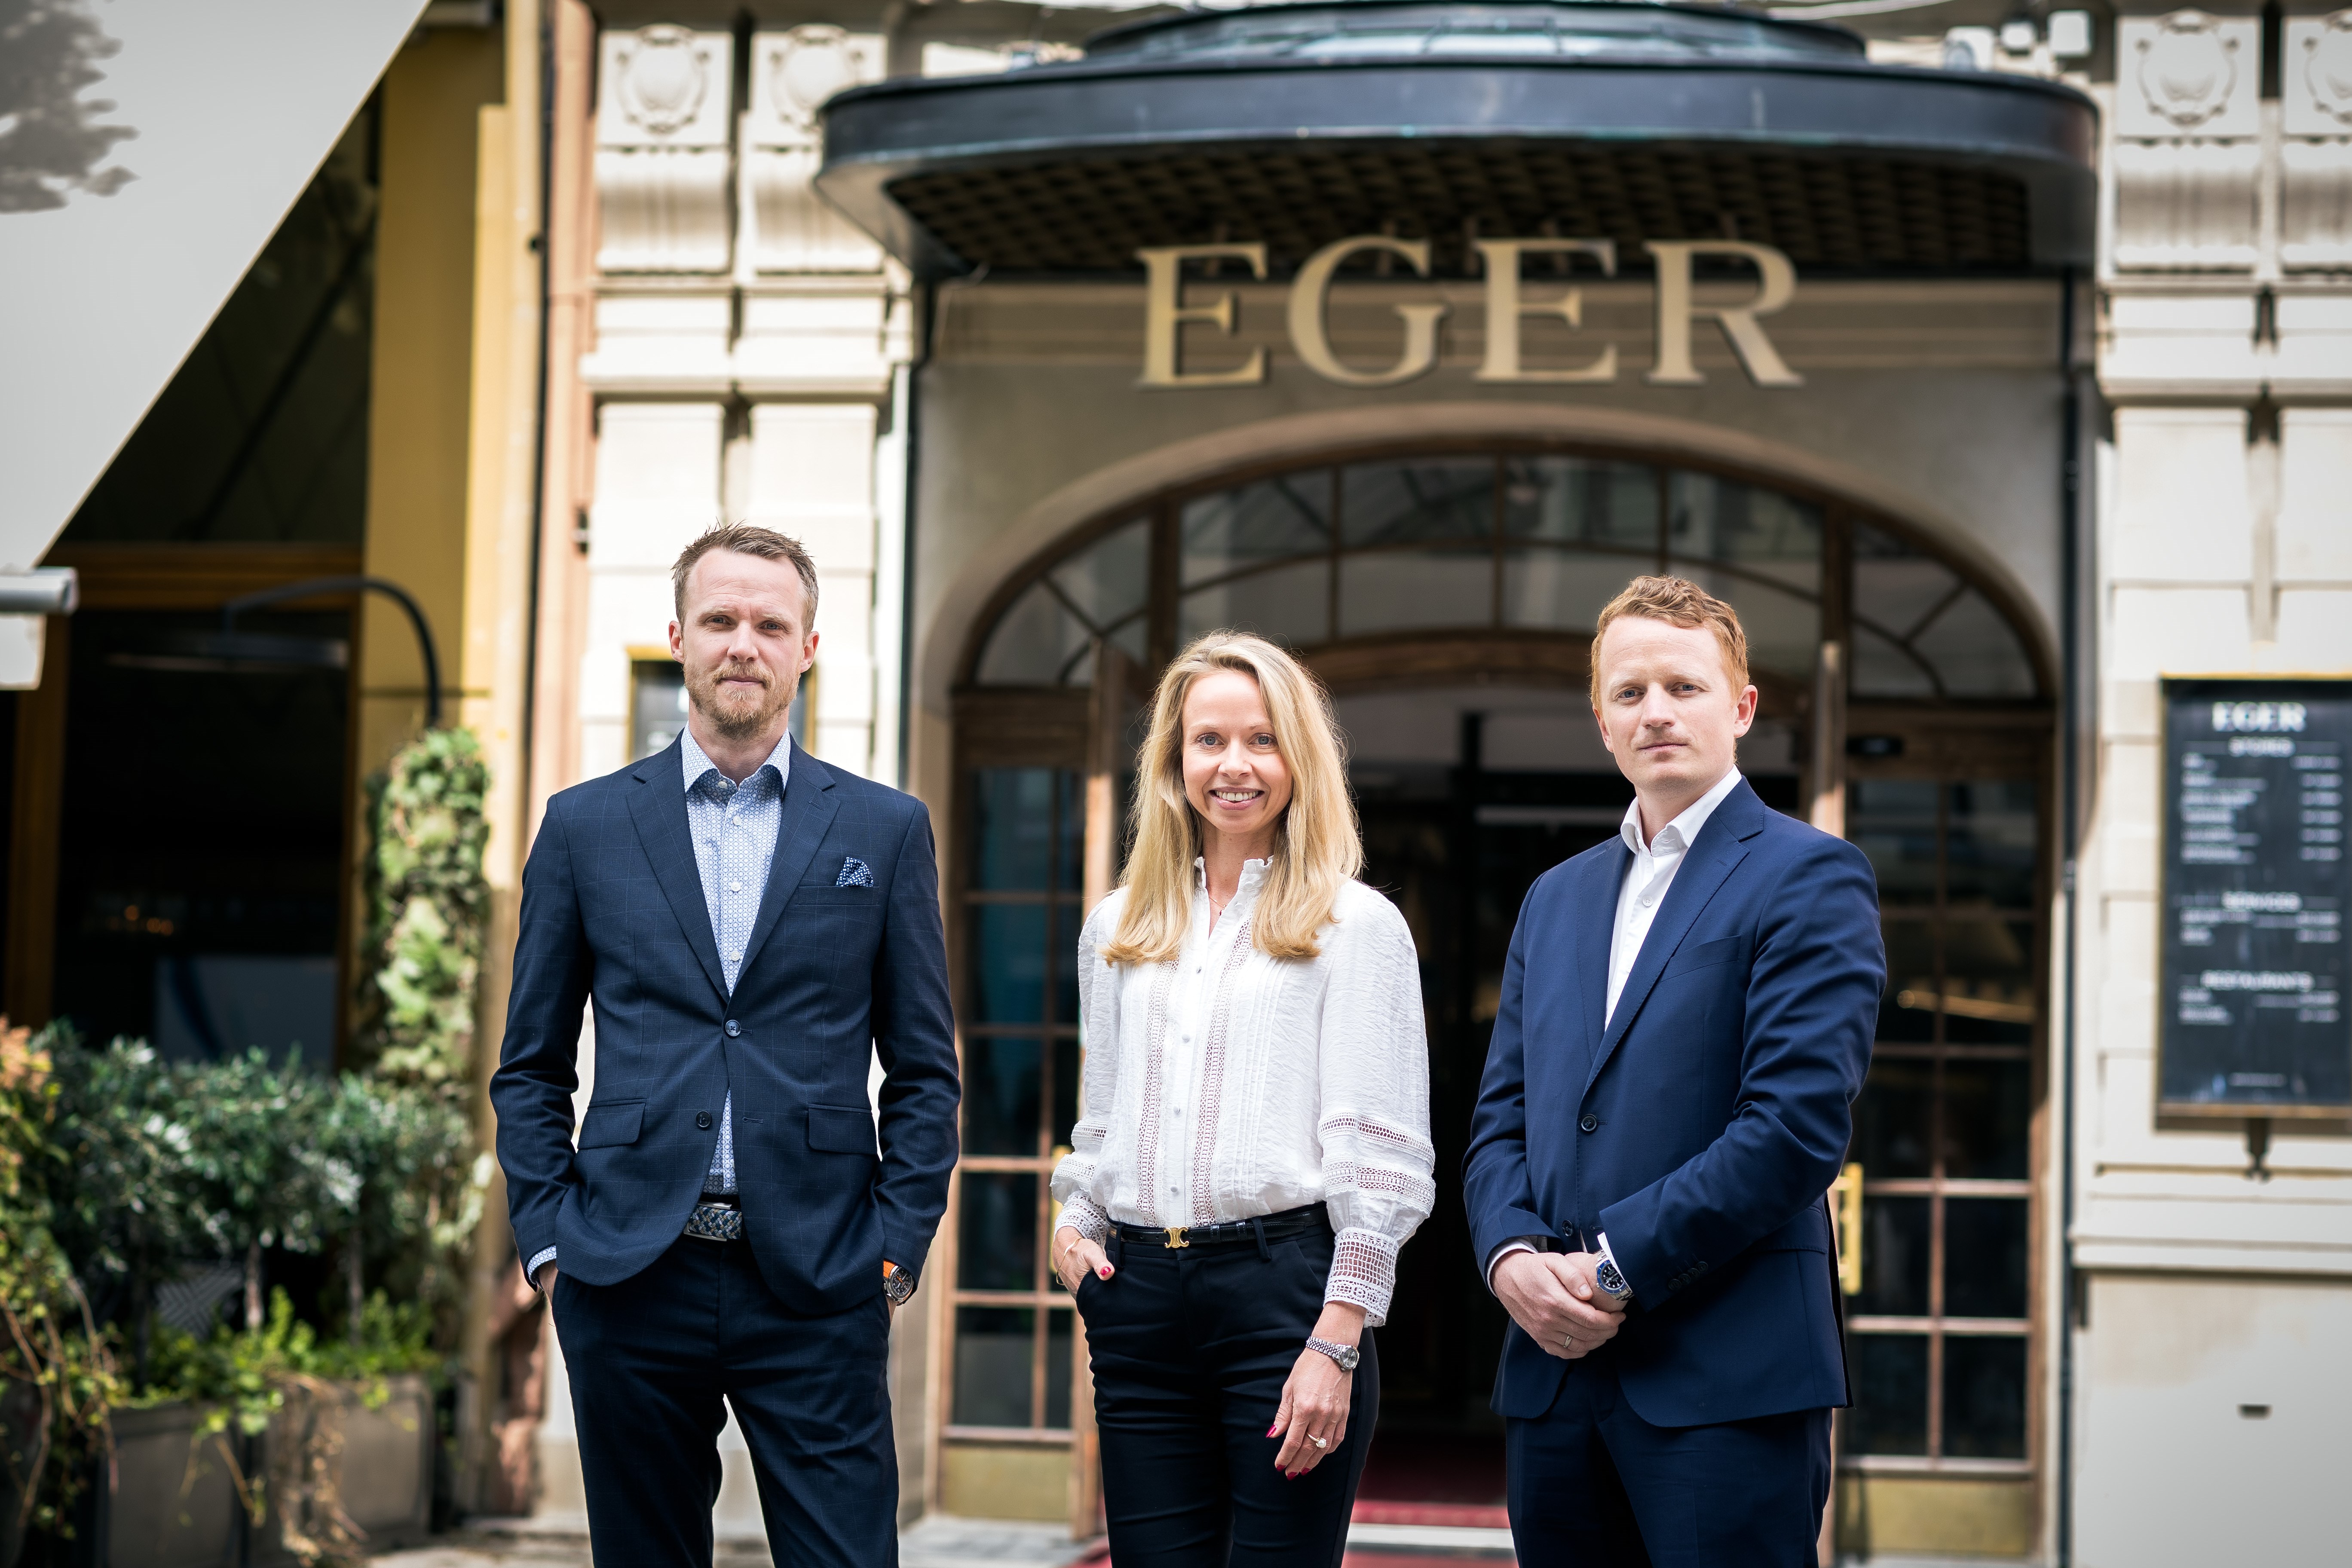 WE ARE PROUD TO REVEAL THE NEXT CHAPTER 
FOR EGER